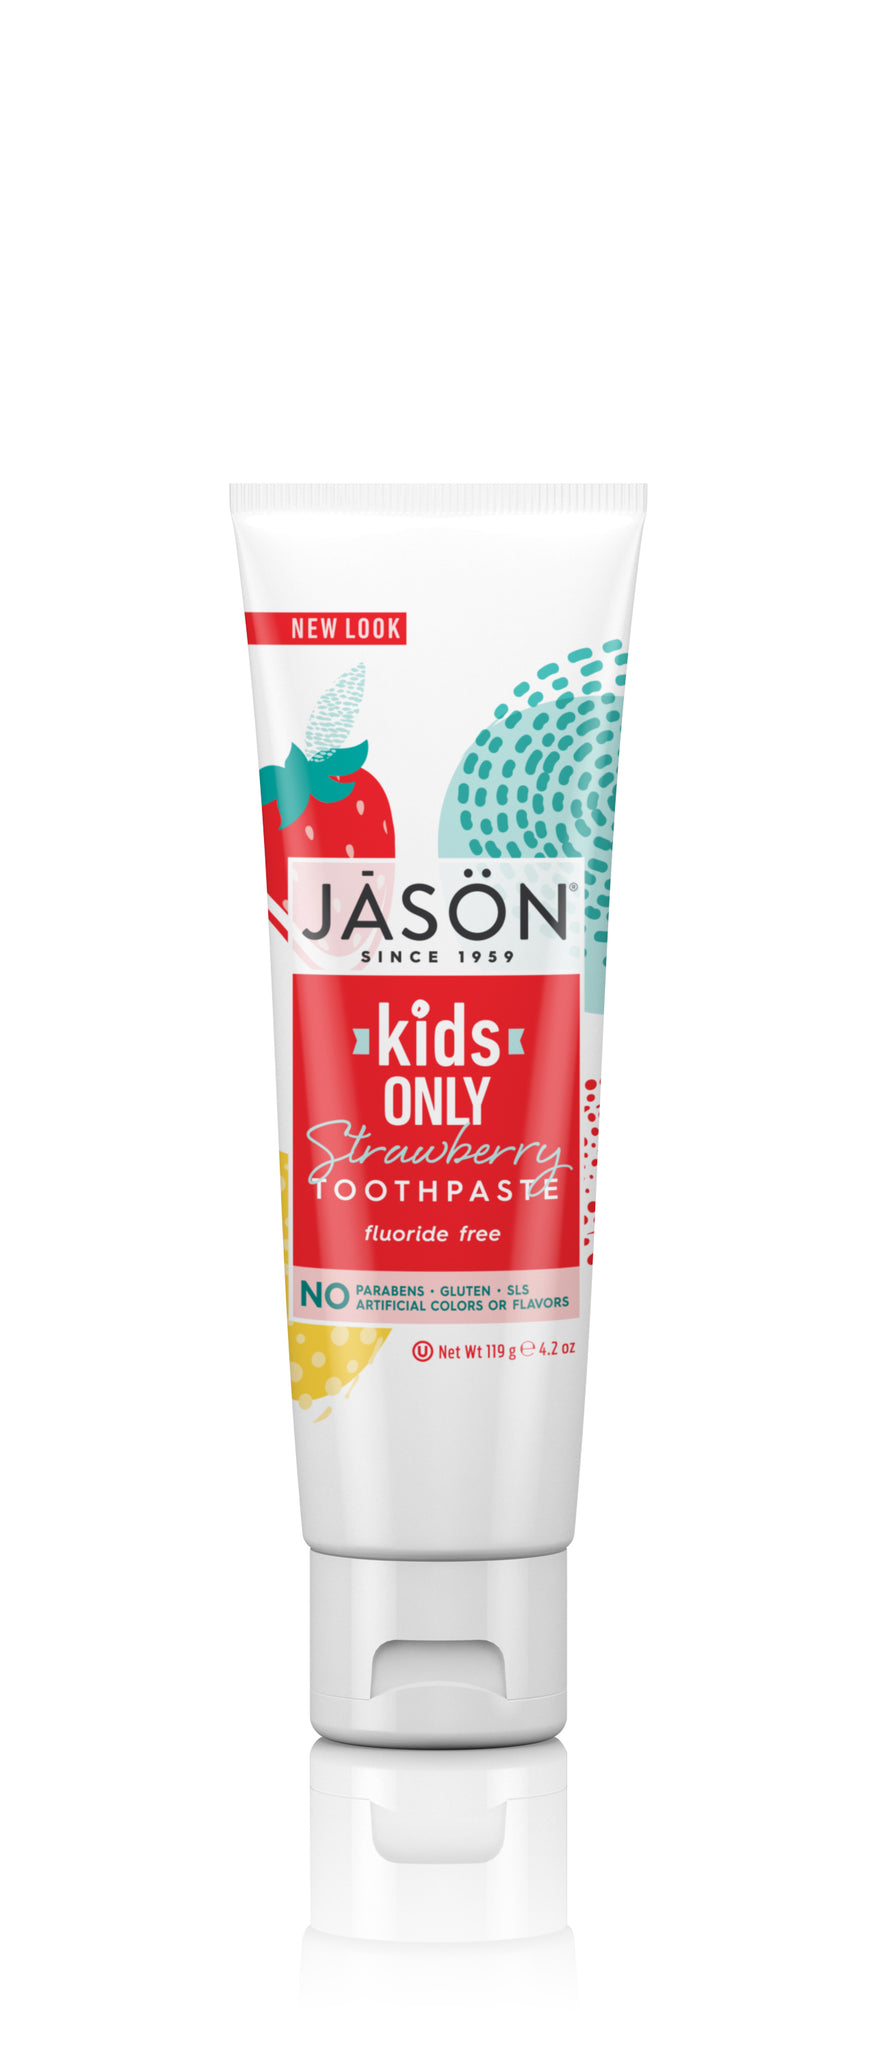 Jason Kids Only Strawberry Toothpaste 119g